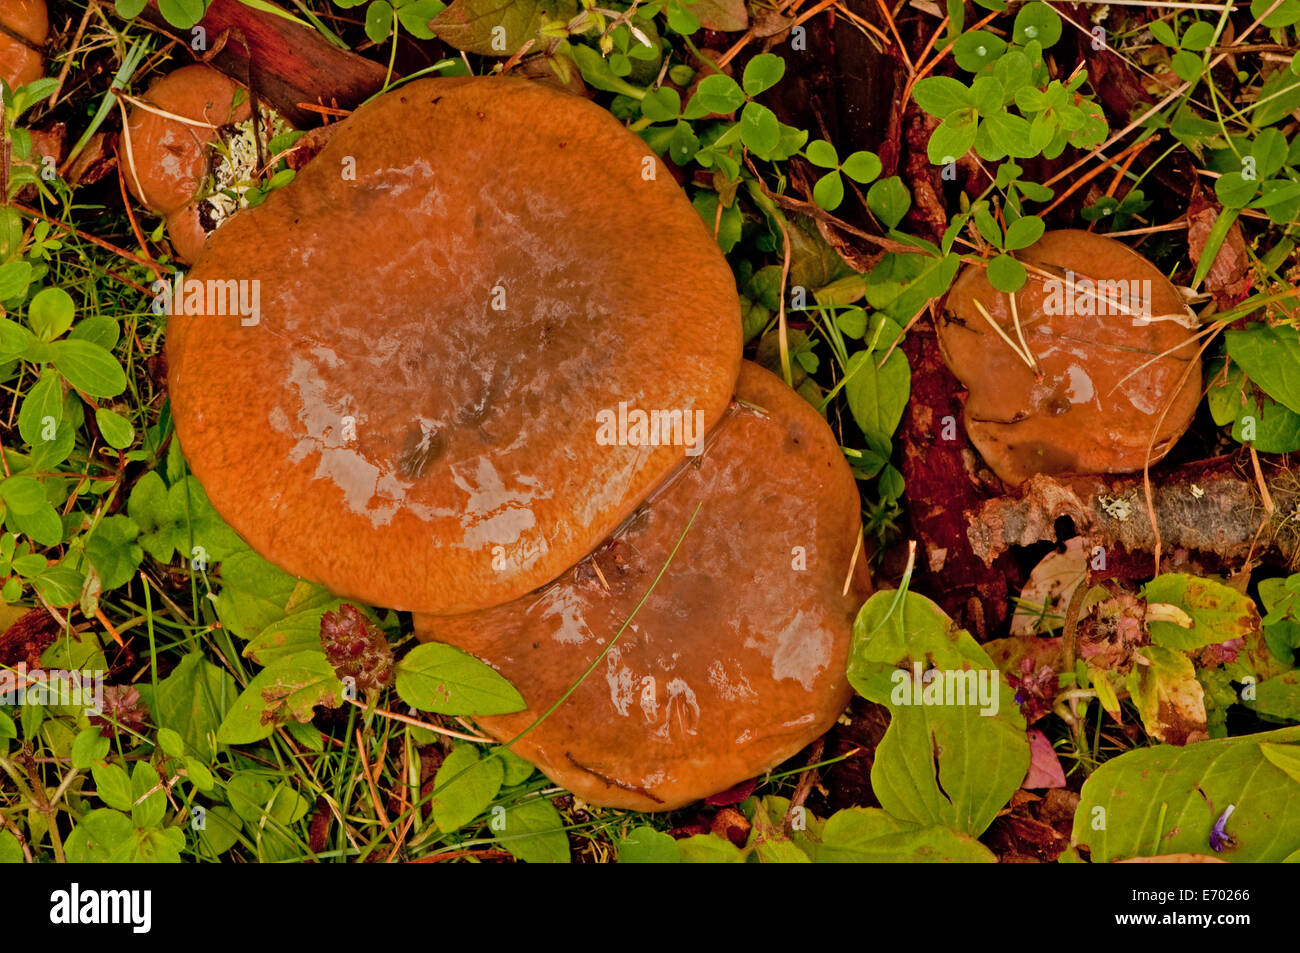 The Deceiver Fungus growing on forest floor Stock Photo